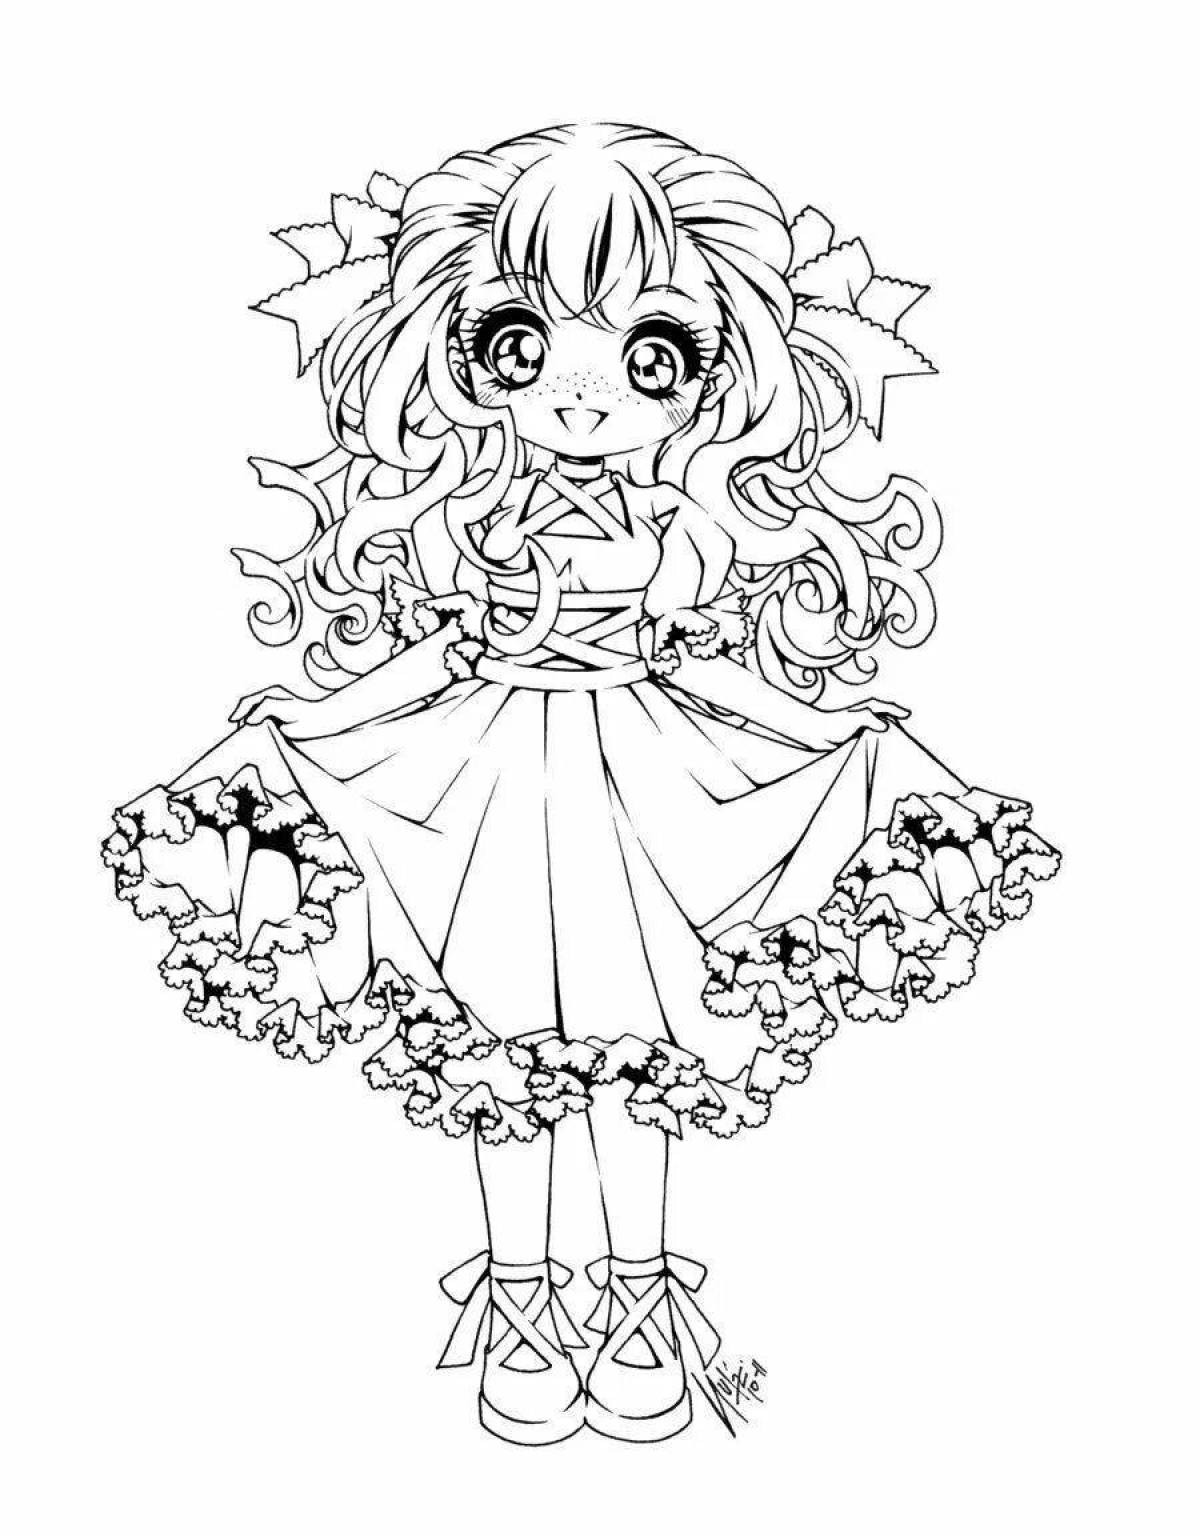 Wonderful anime cute coloring pages